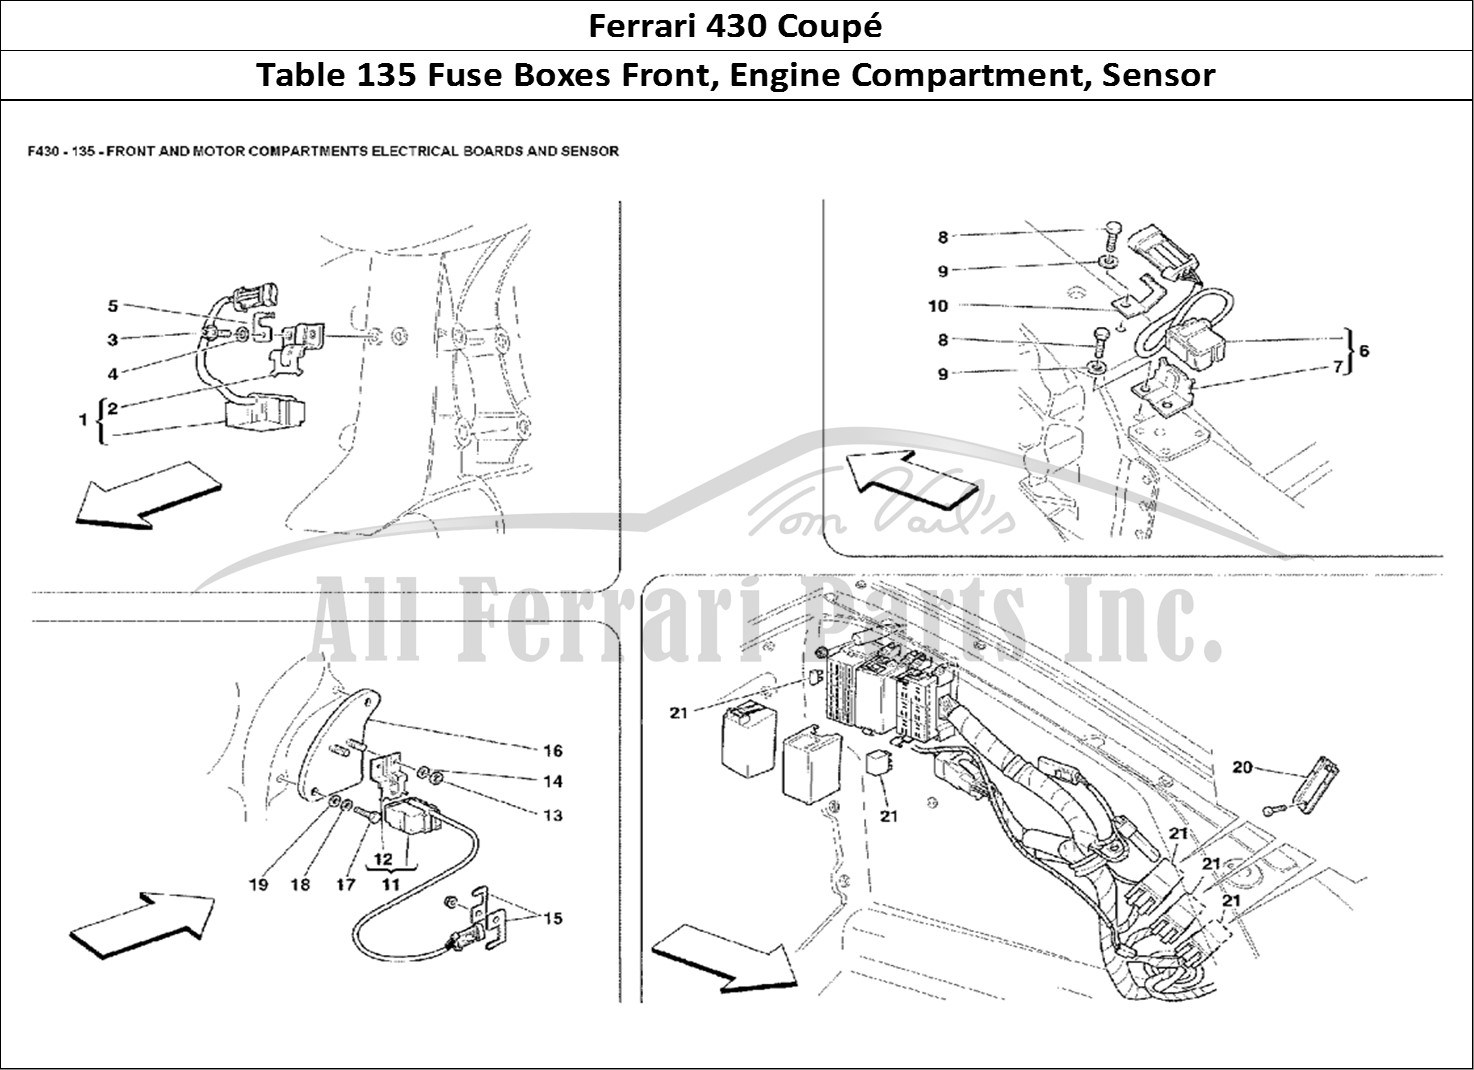 Ferrari Parts Ferrari 430 Coup Page 135 Front and Motor Compartme